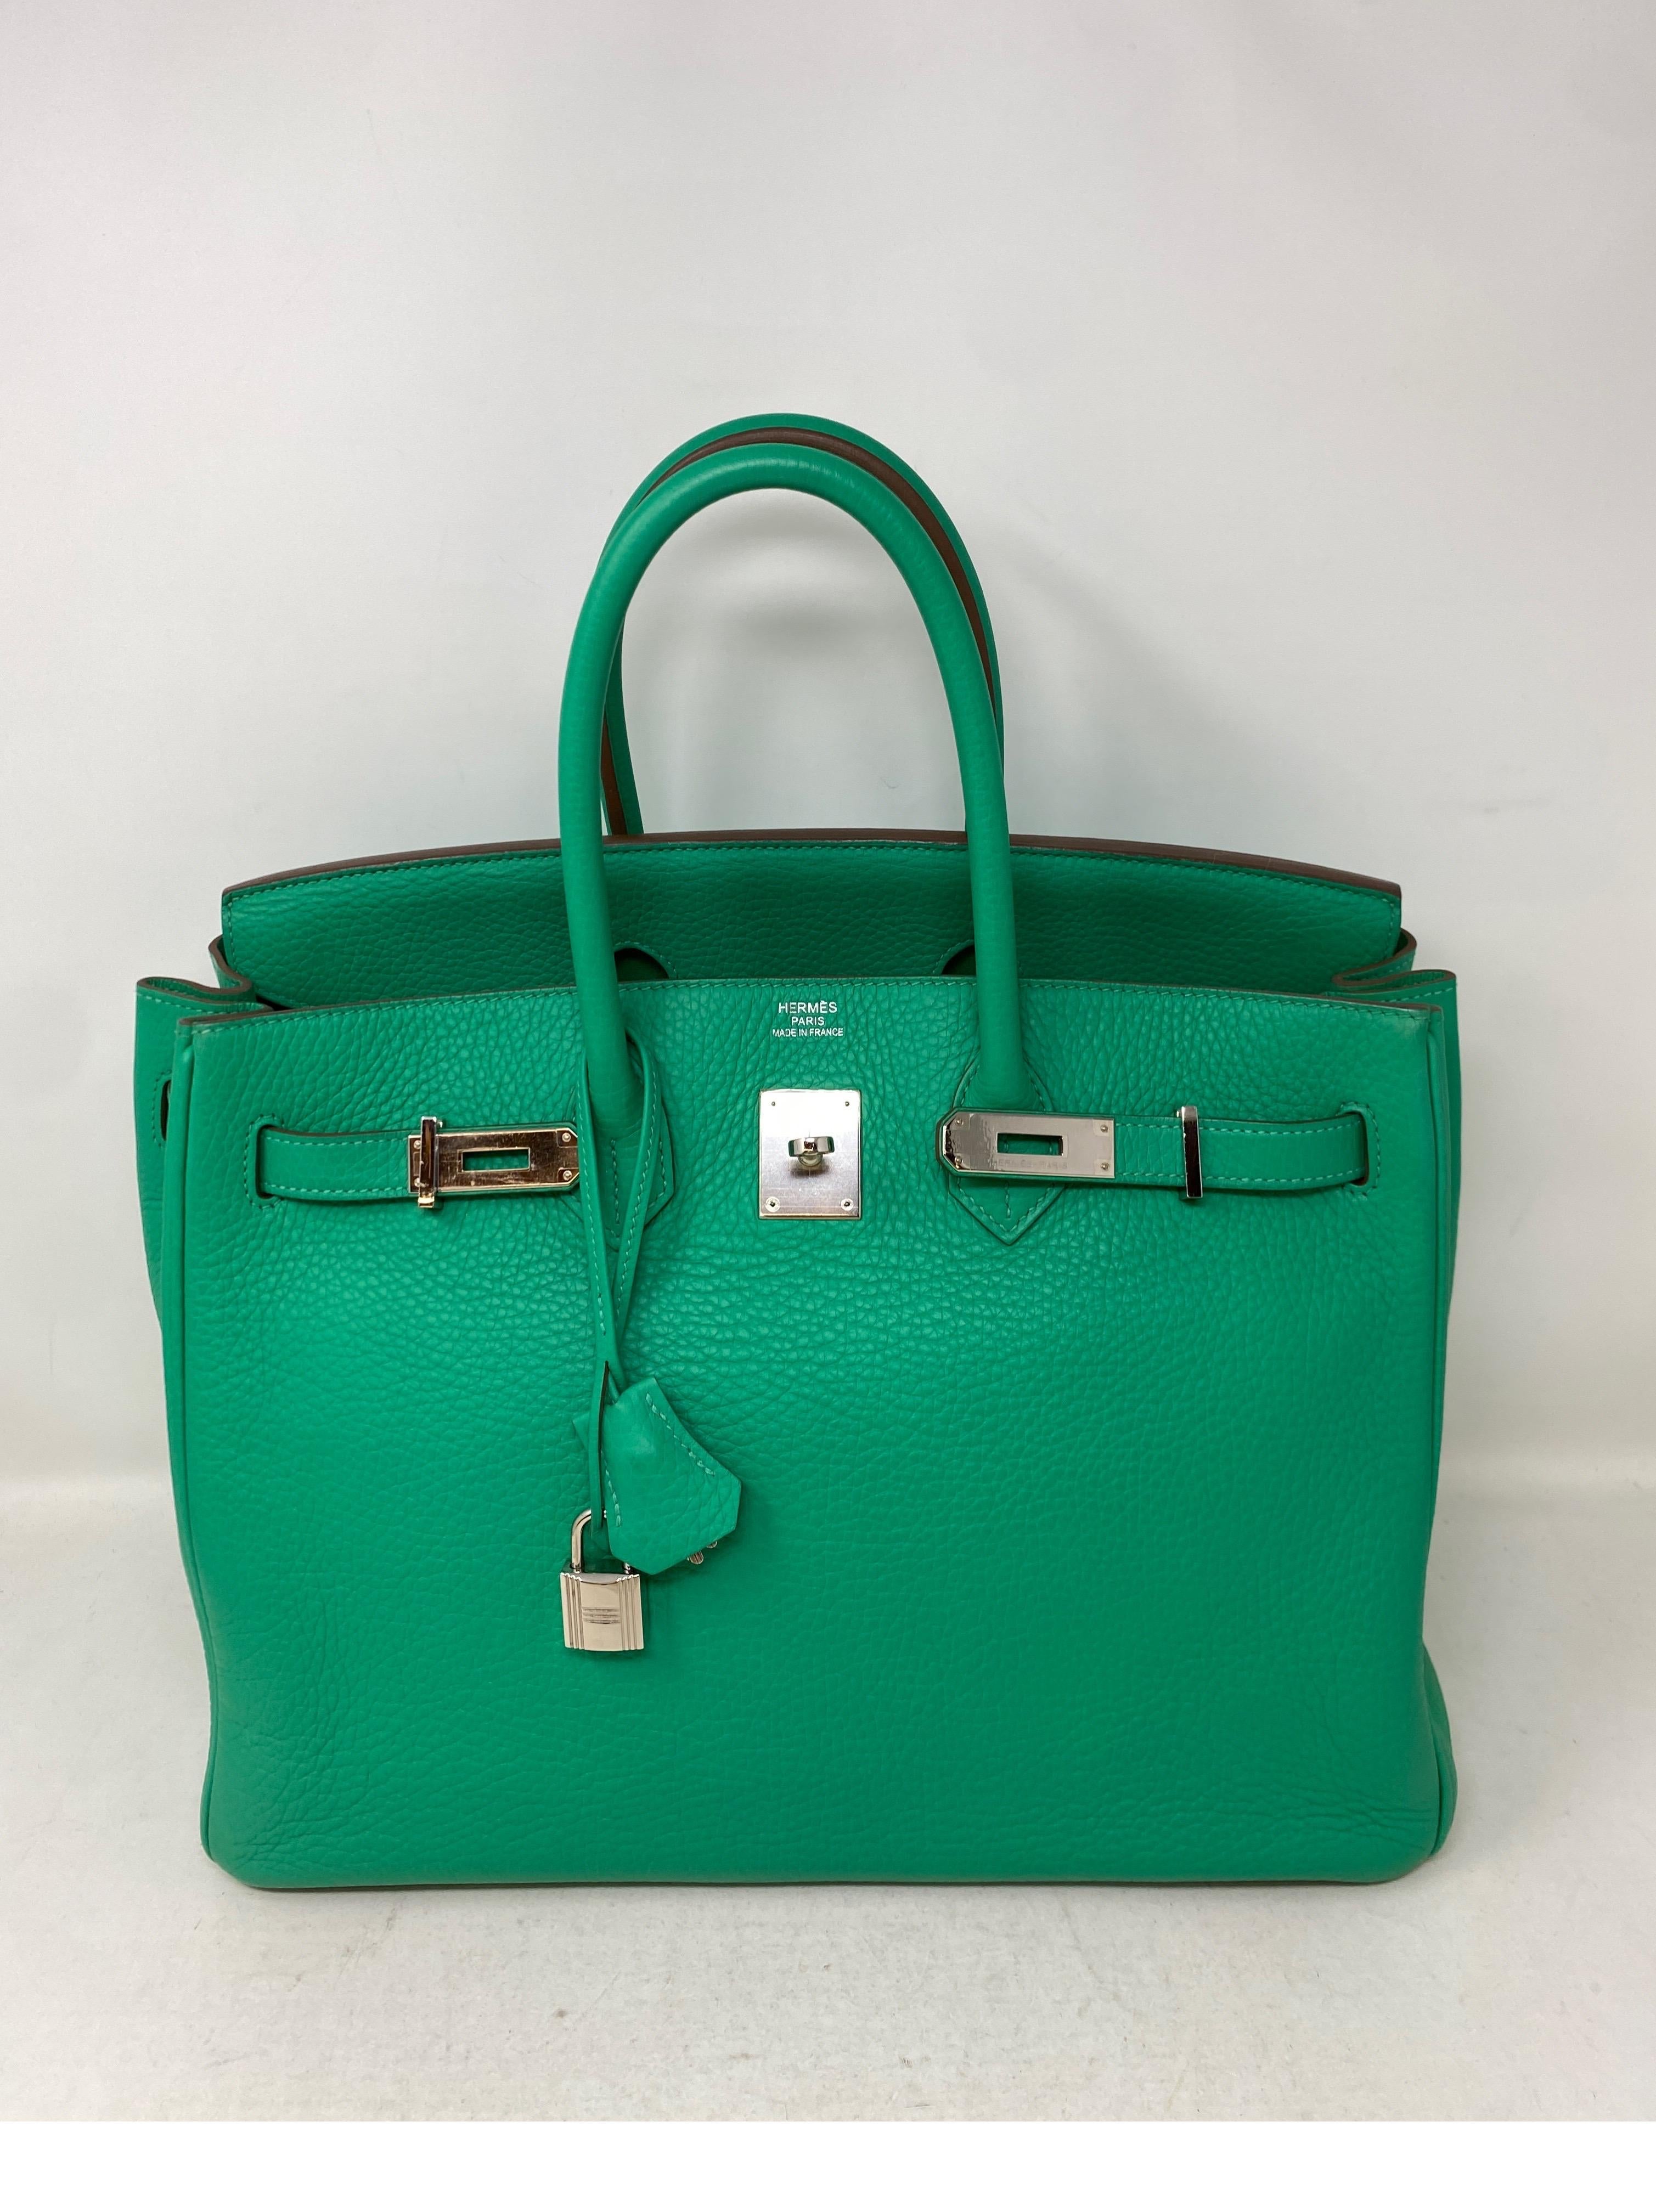 Hermes Menthe Birkin 35 Bag. Palladium silver hardware. Excellent condition. Minty green color bag. Neutral green color. Clemence leather. Sturdy leather and very clean. Interior like new. Includes clochette, lock, keys, and dust bag. Guaranteed